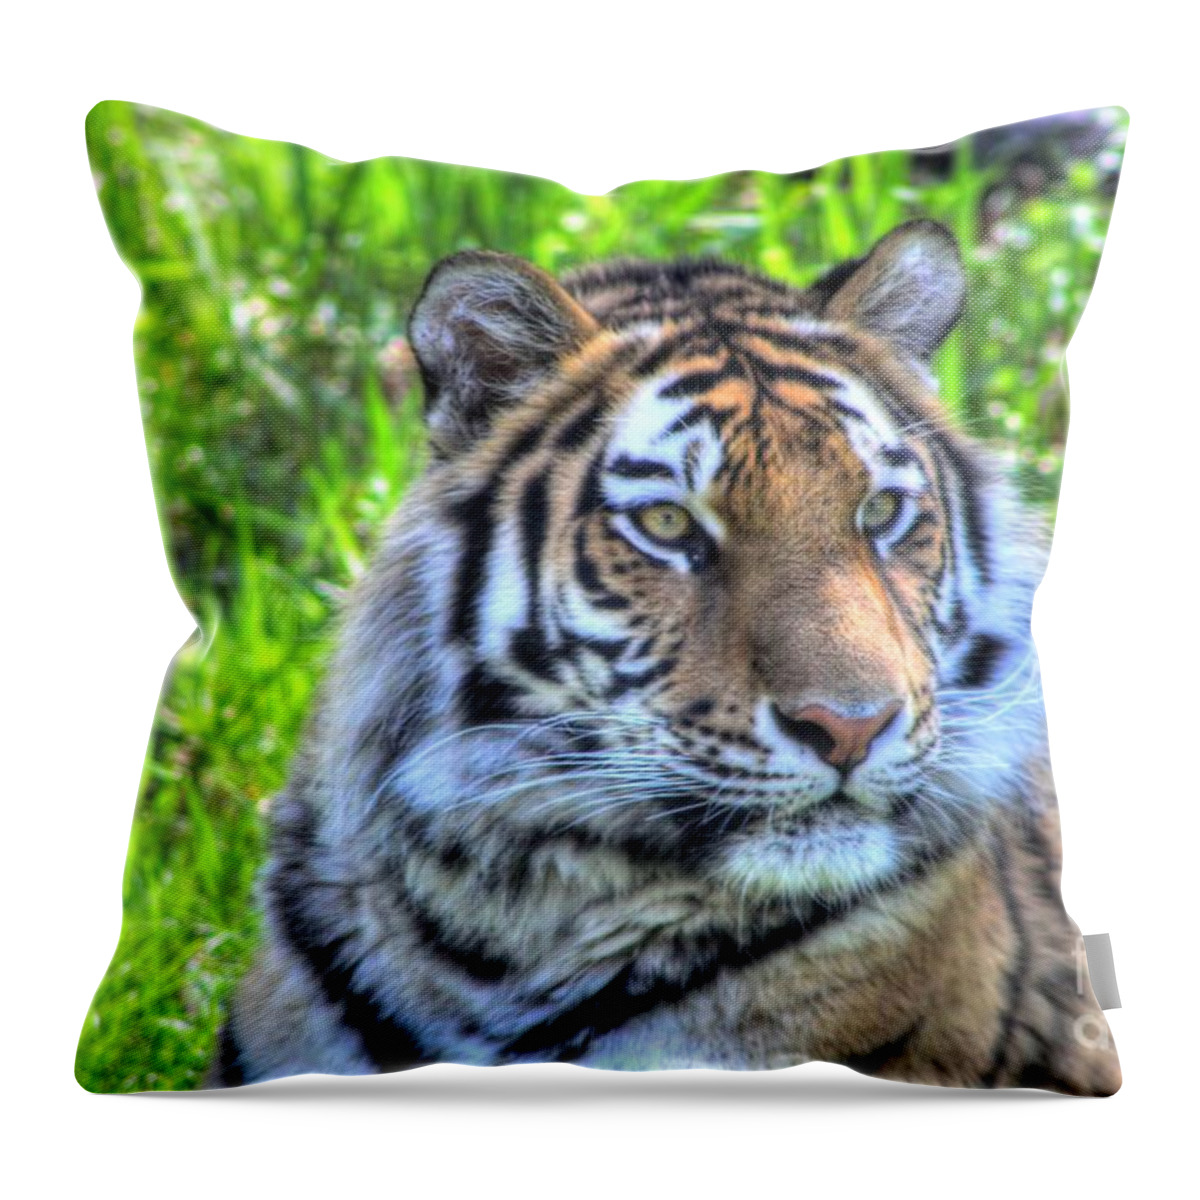 Amur Tiger Throw Pillow featuring the photograph Amur Tiger 6 by Jimmy Ostgard